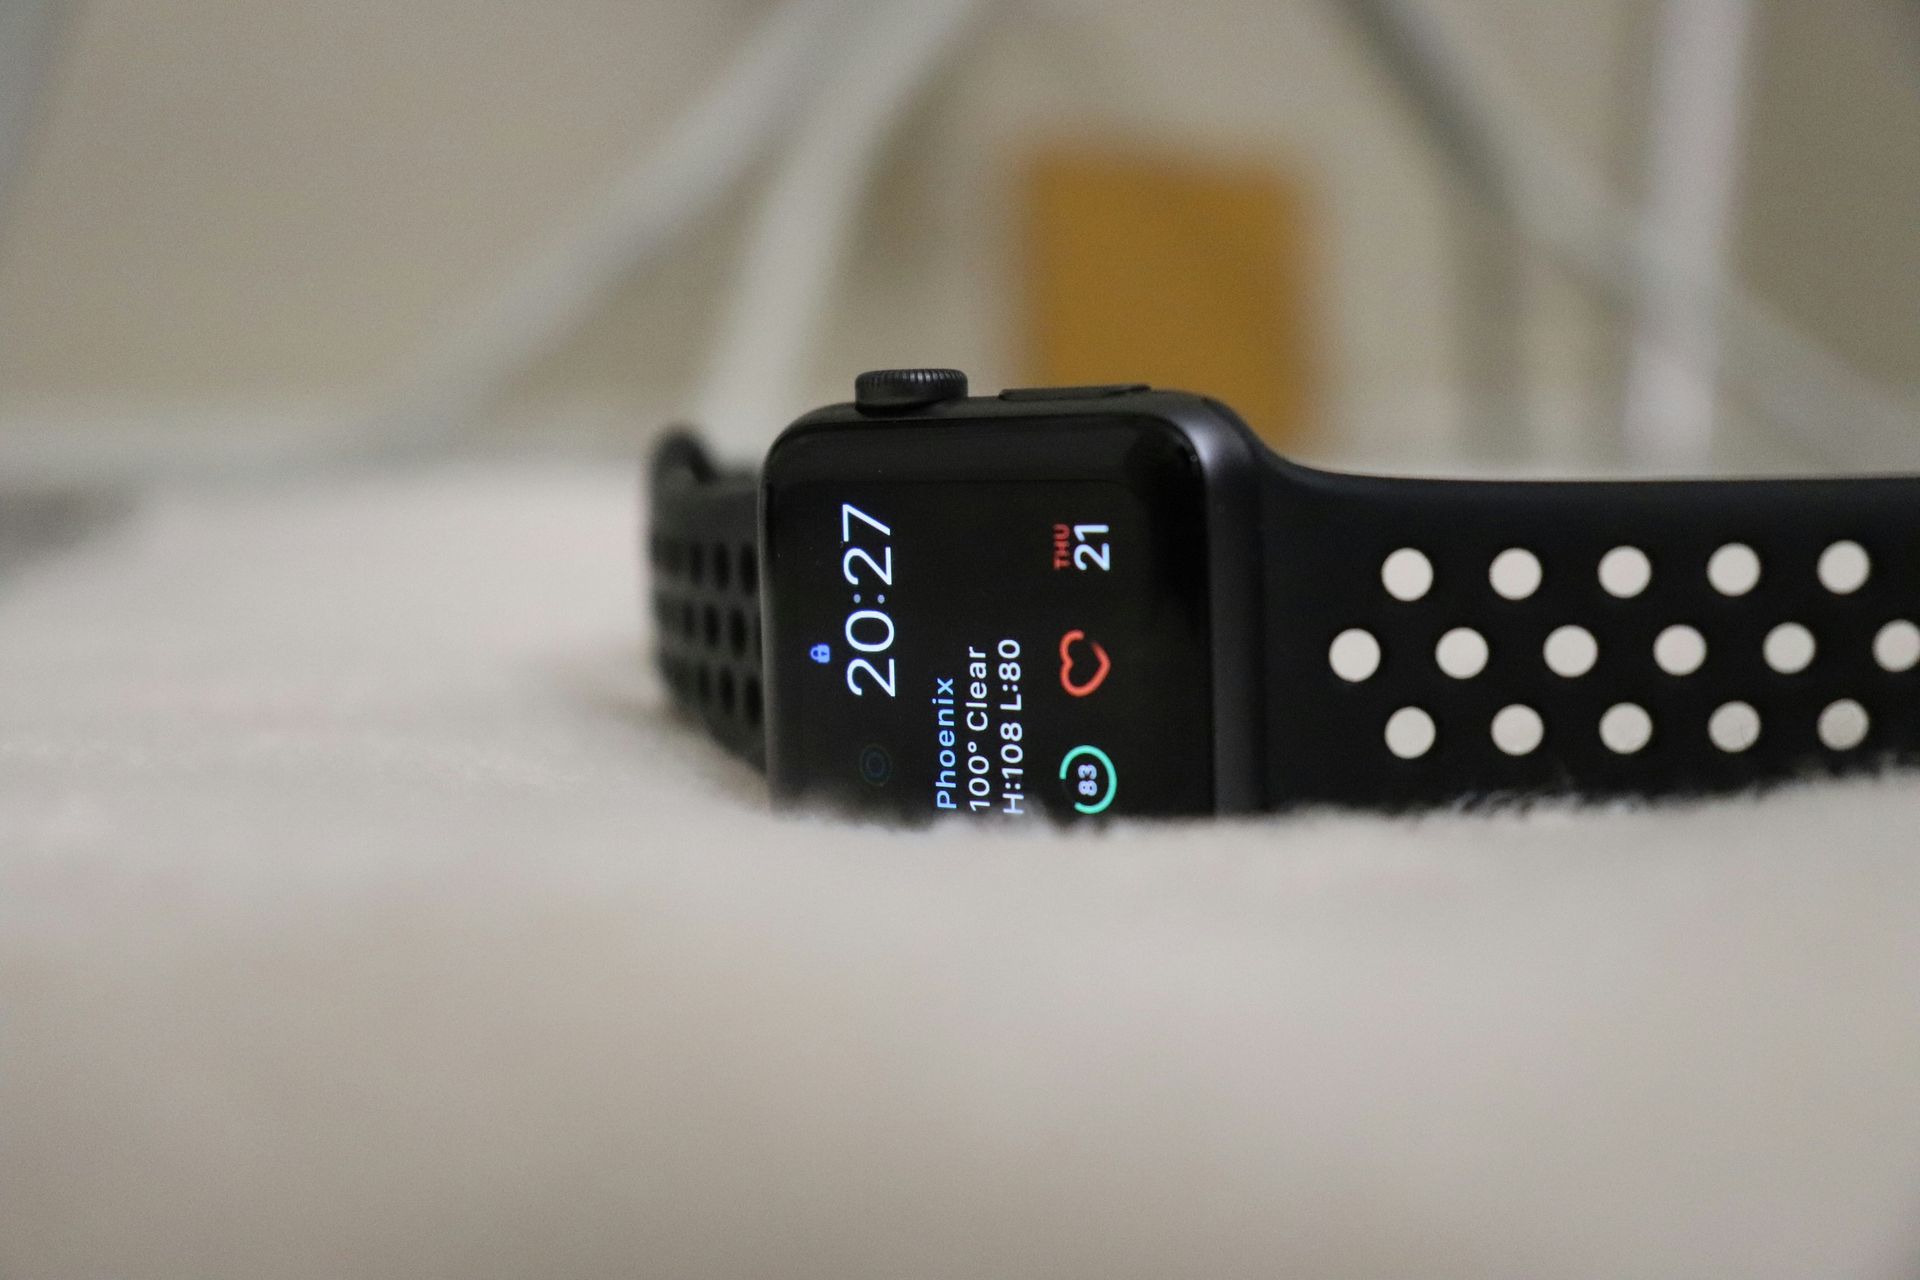 The new Apple Watch will bring three things